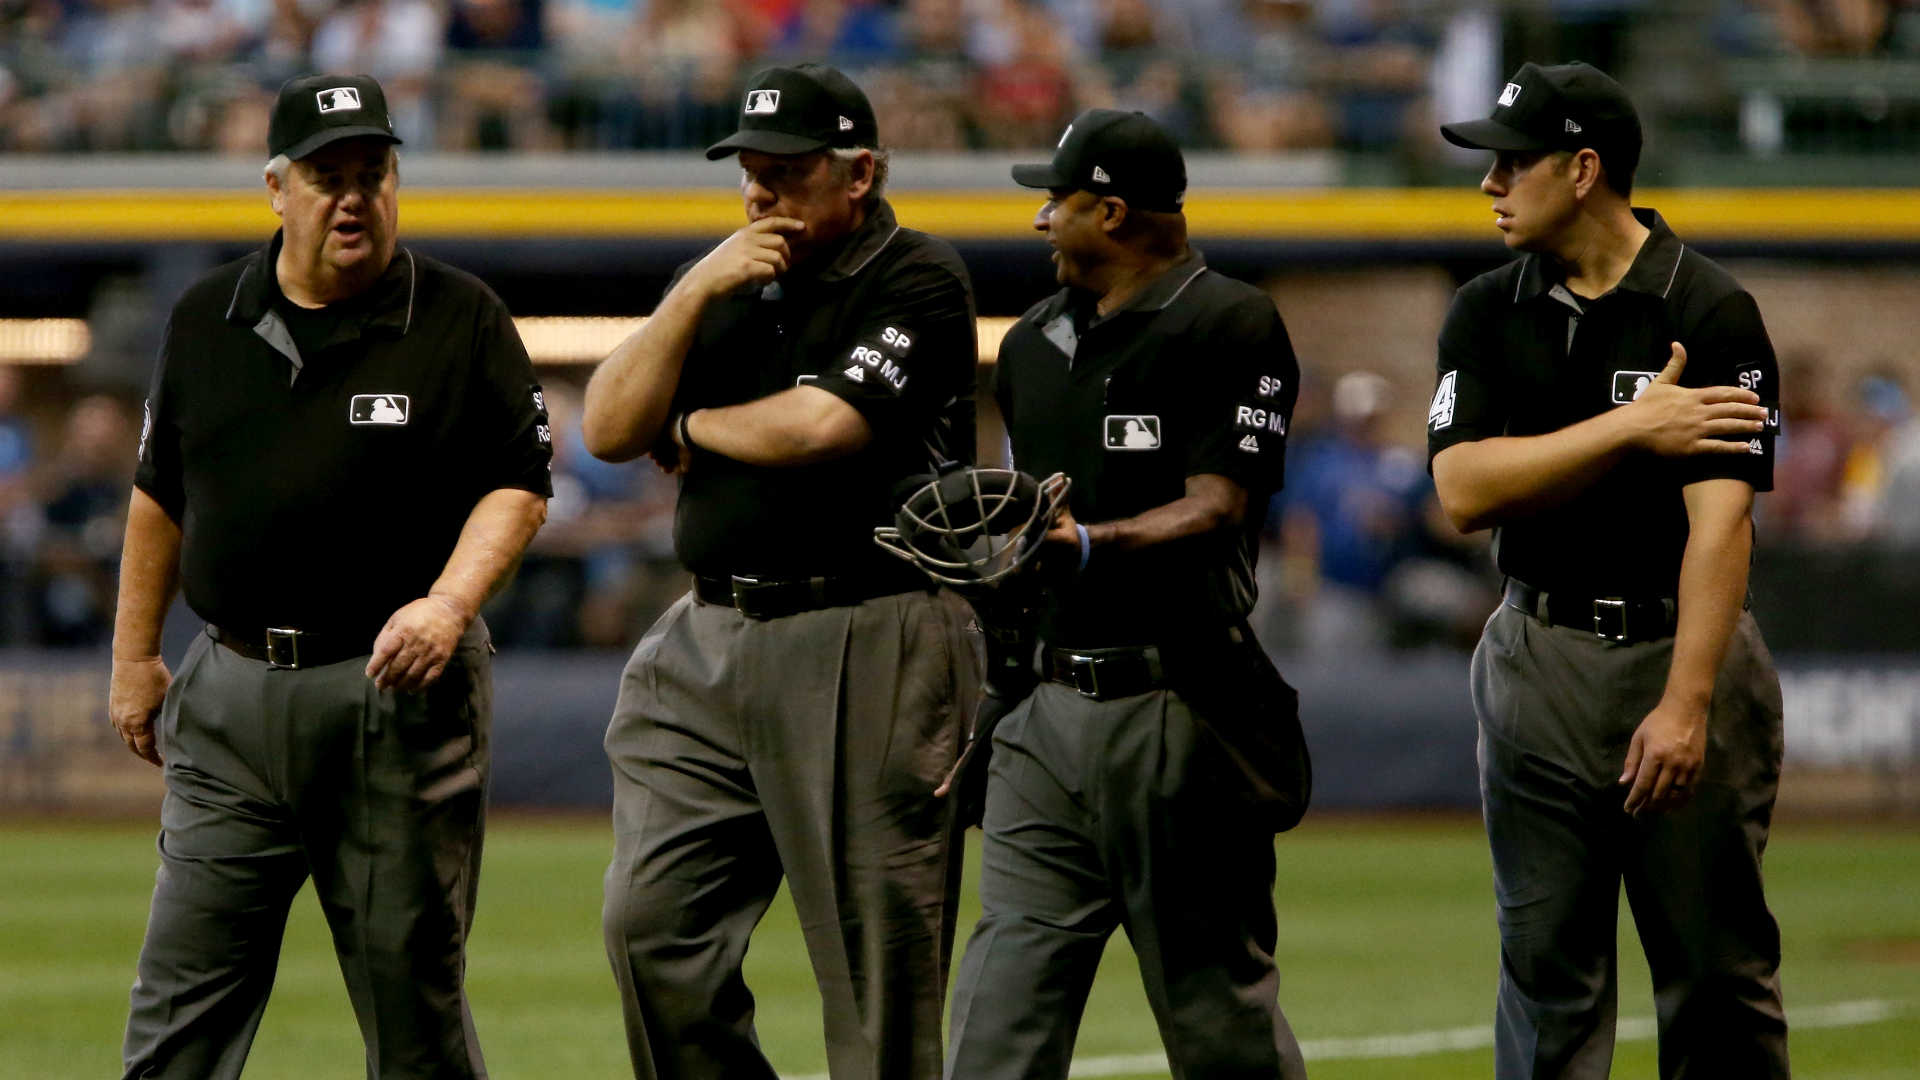 Mlb Umpire Schedule 2022 Mlb Umpire Salary: How Much Do Mlb Umpires Get Paid?